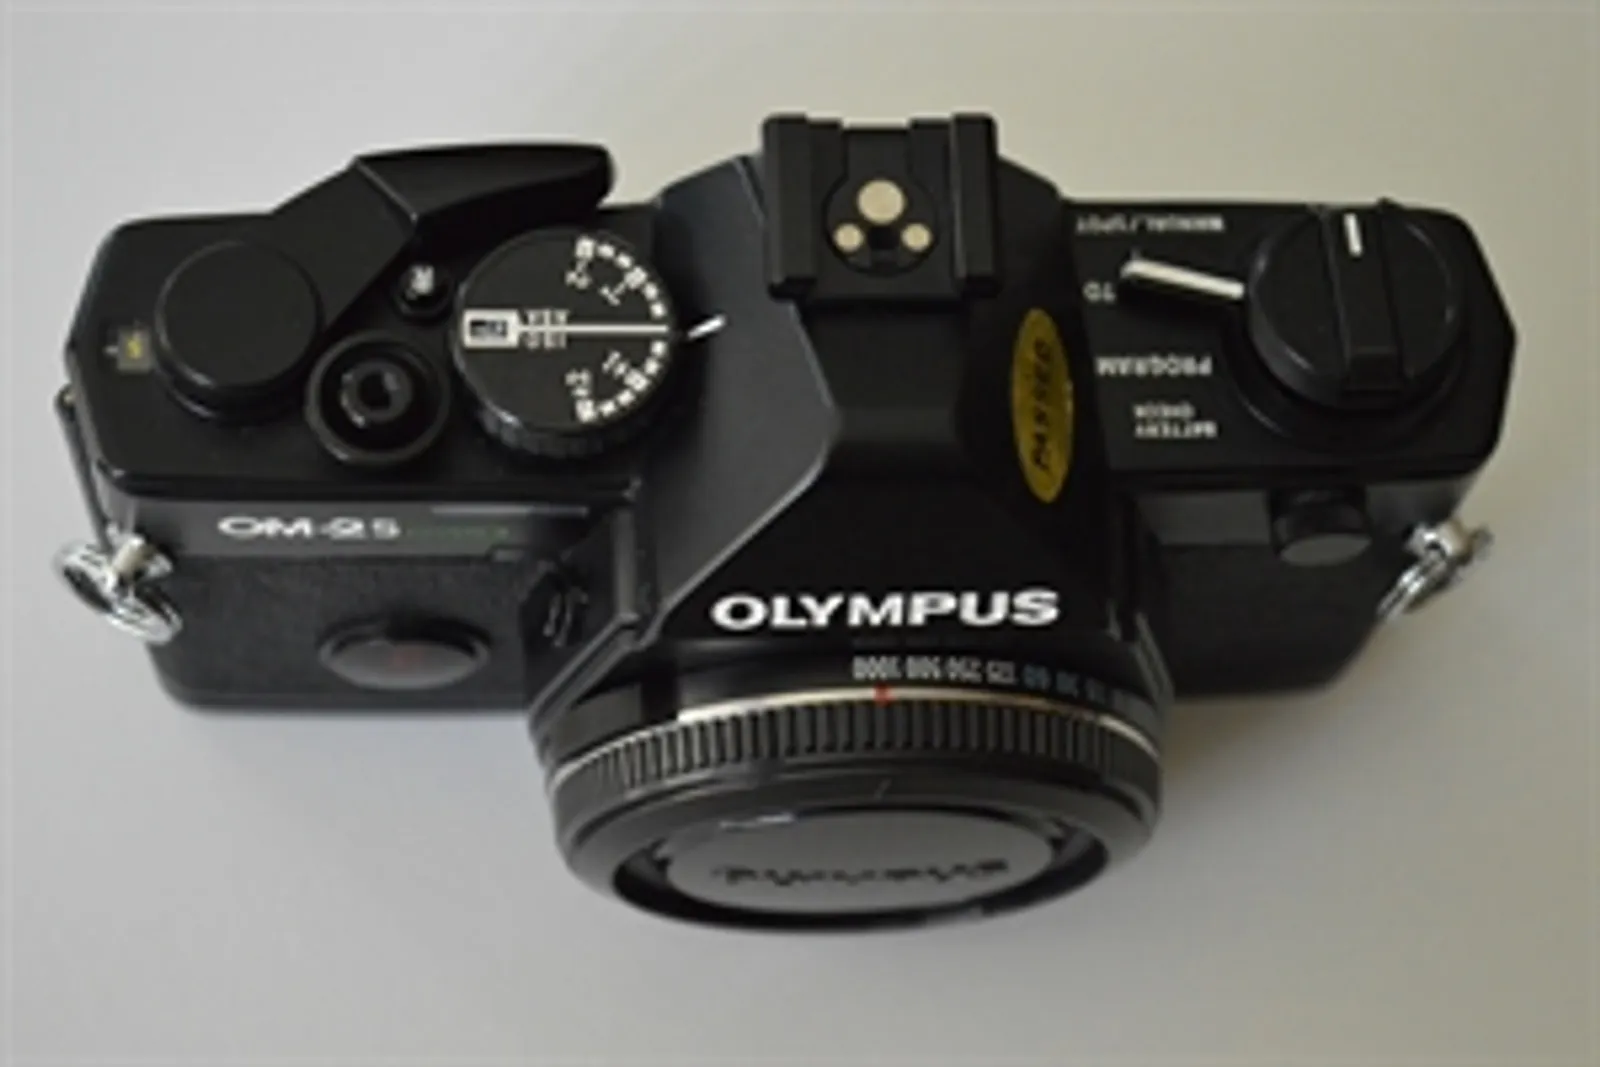 OLYMPUS OM-2S PROGRAM 35MM CAMERA OUTFIT